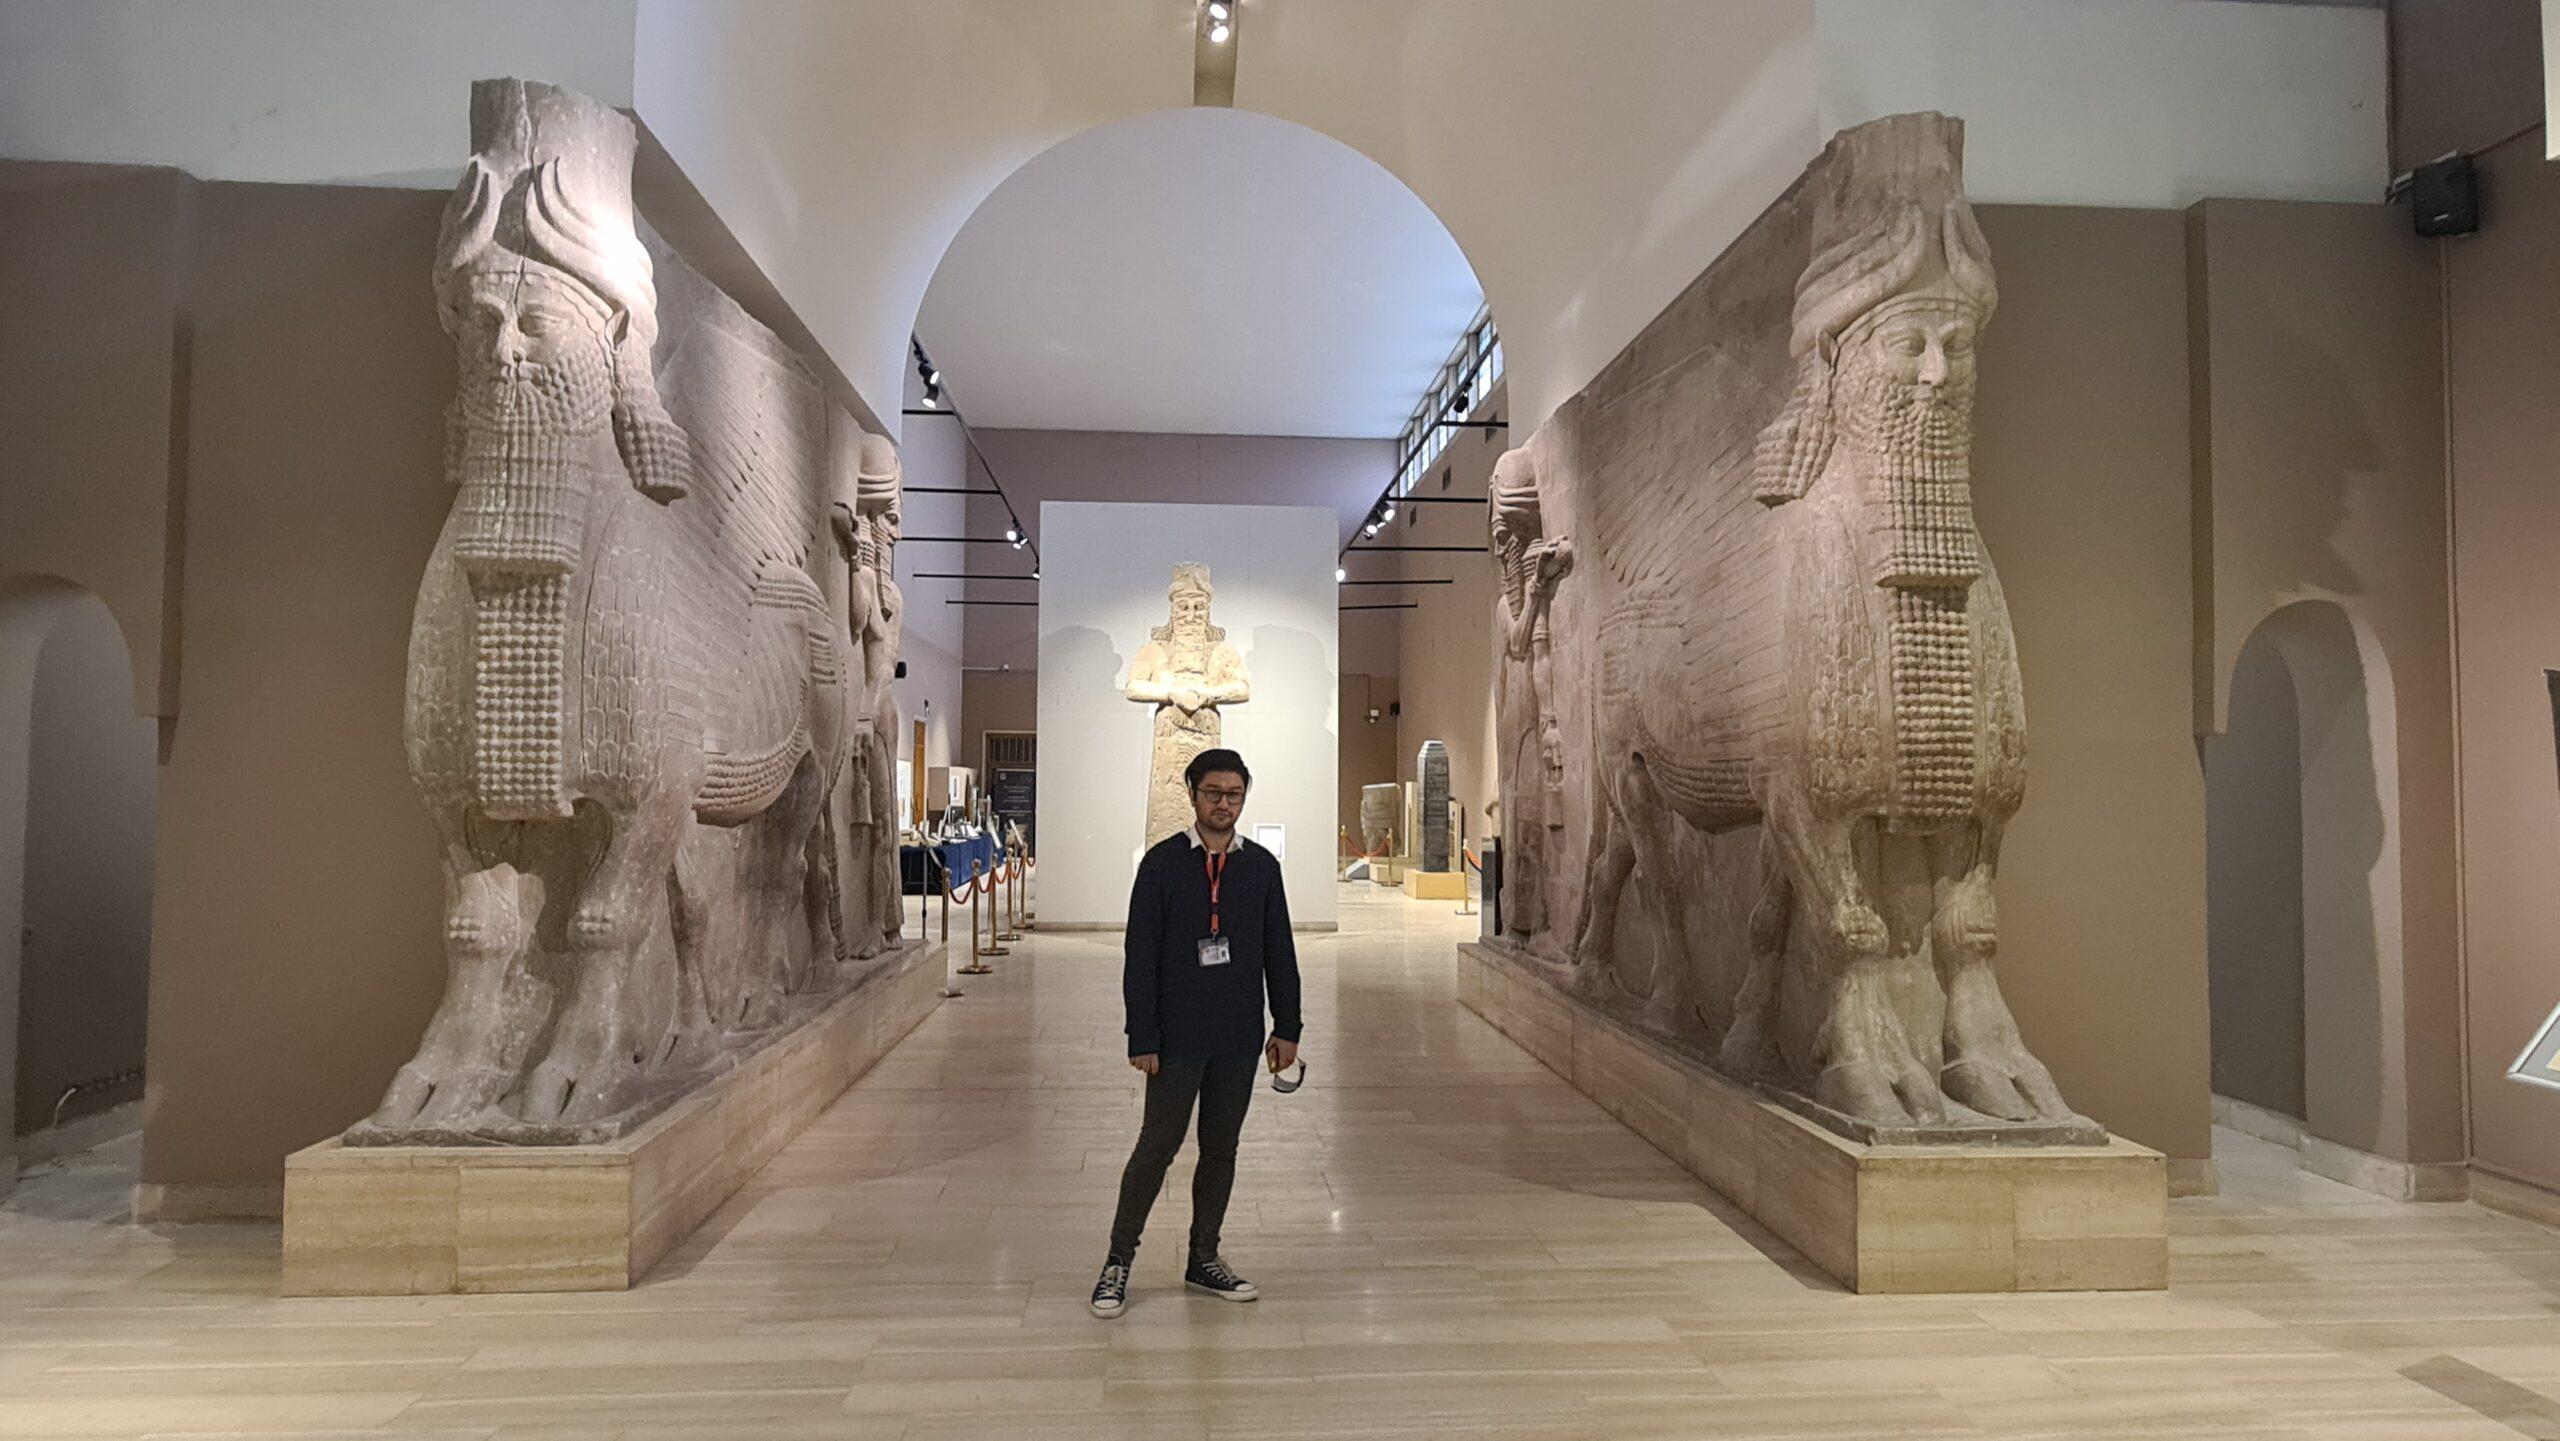 Visiting the national museum of Iraq in Baghdad